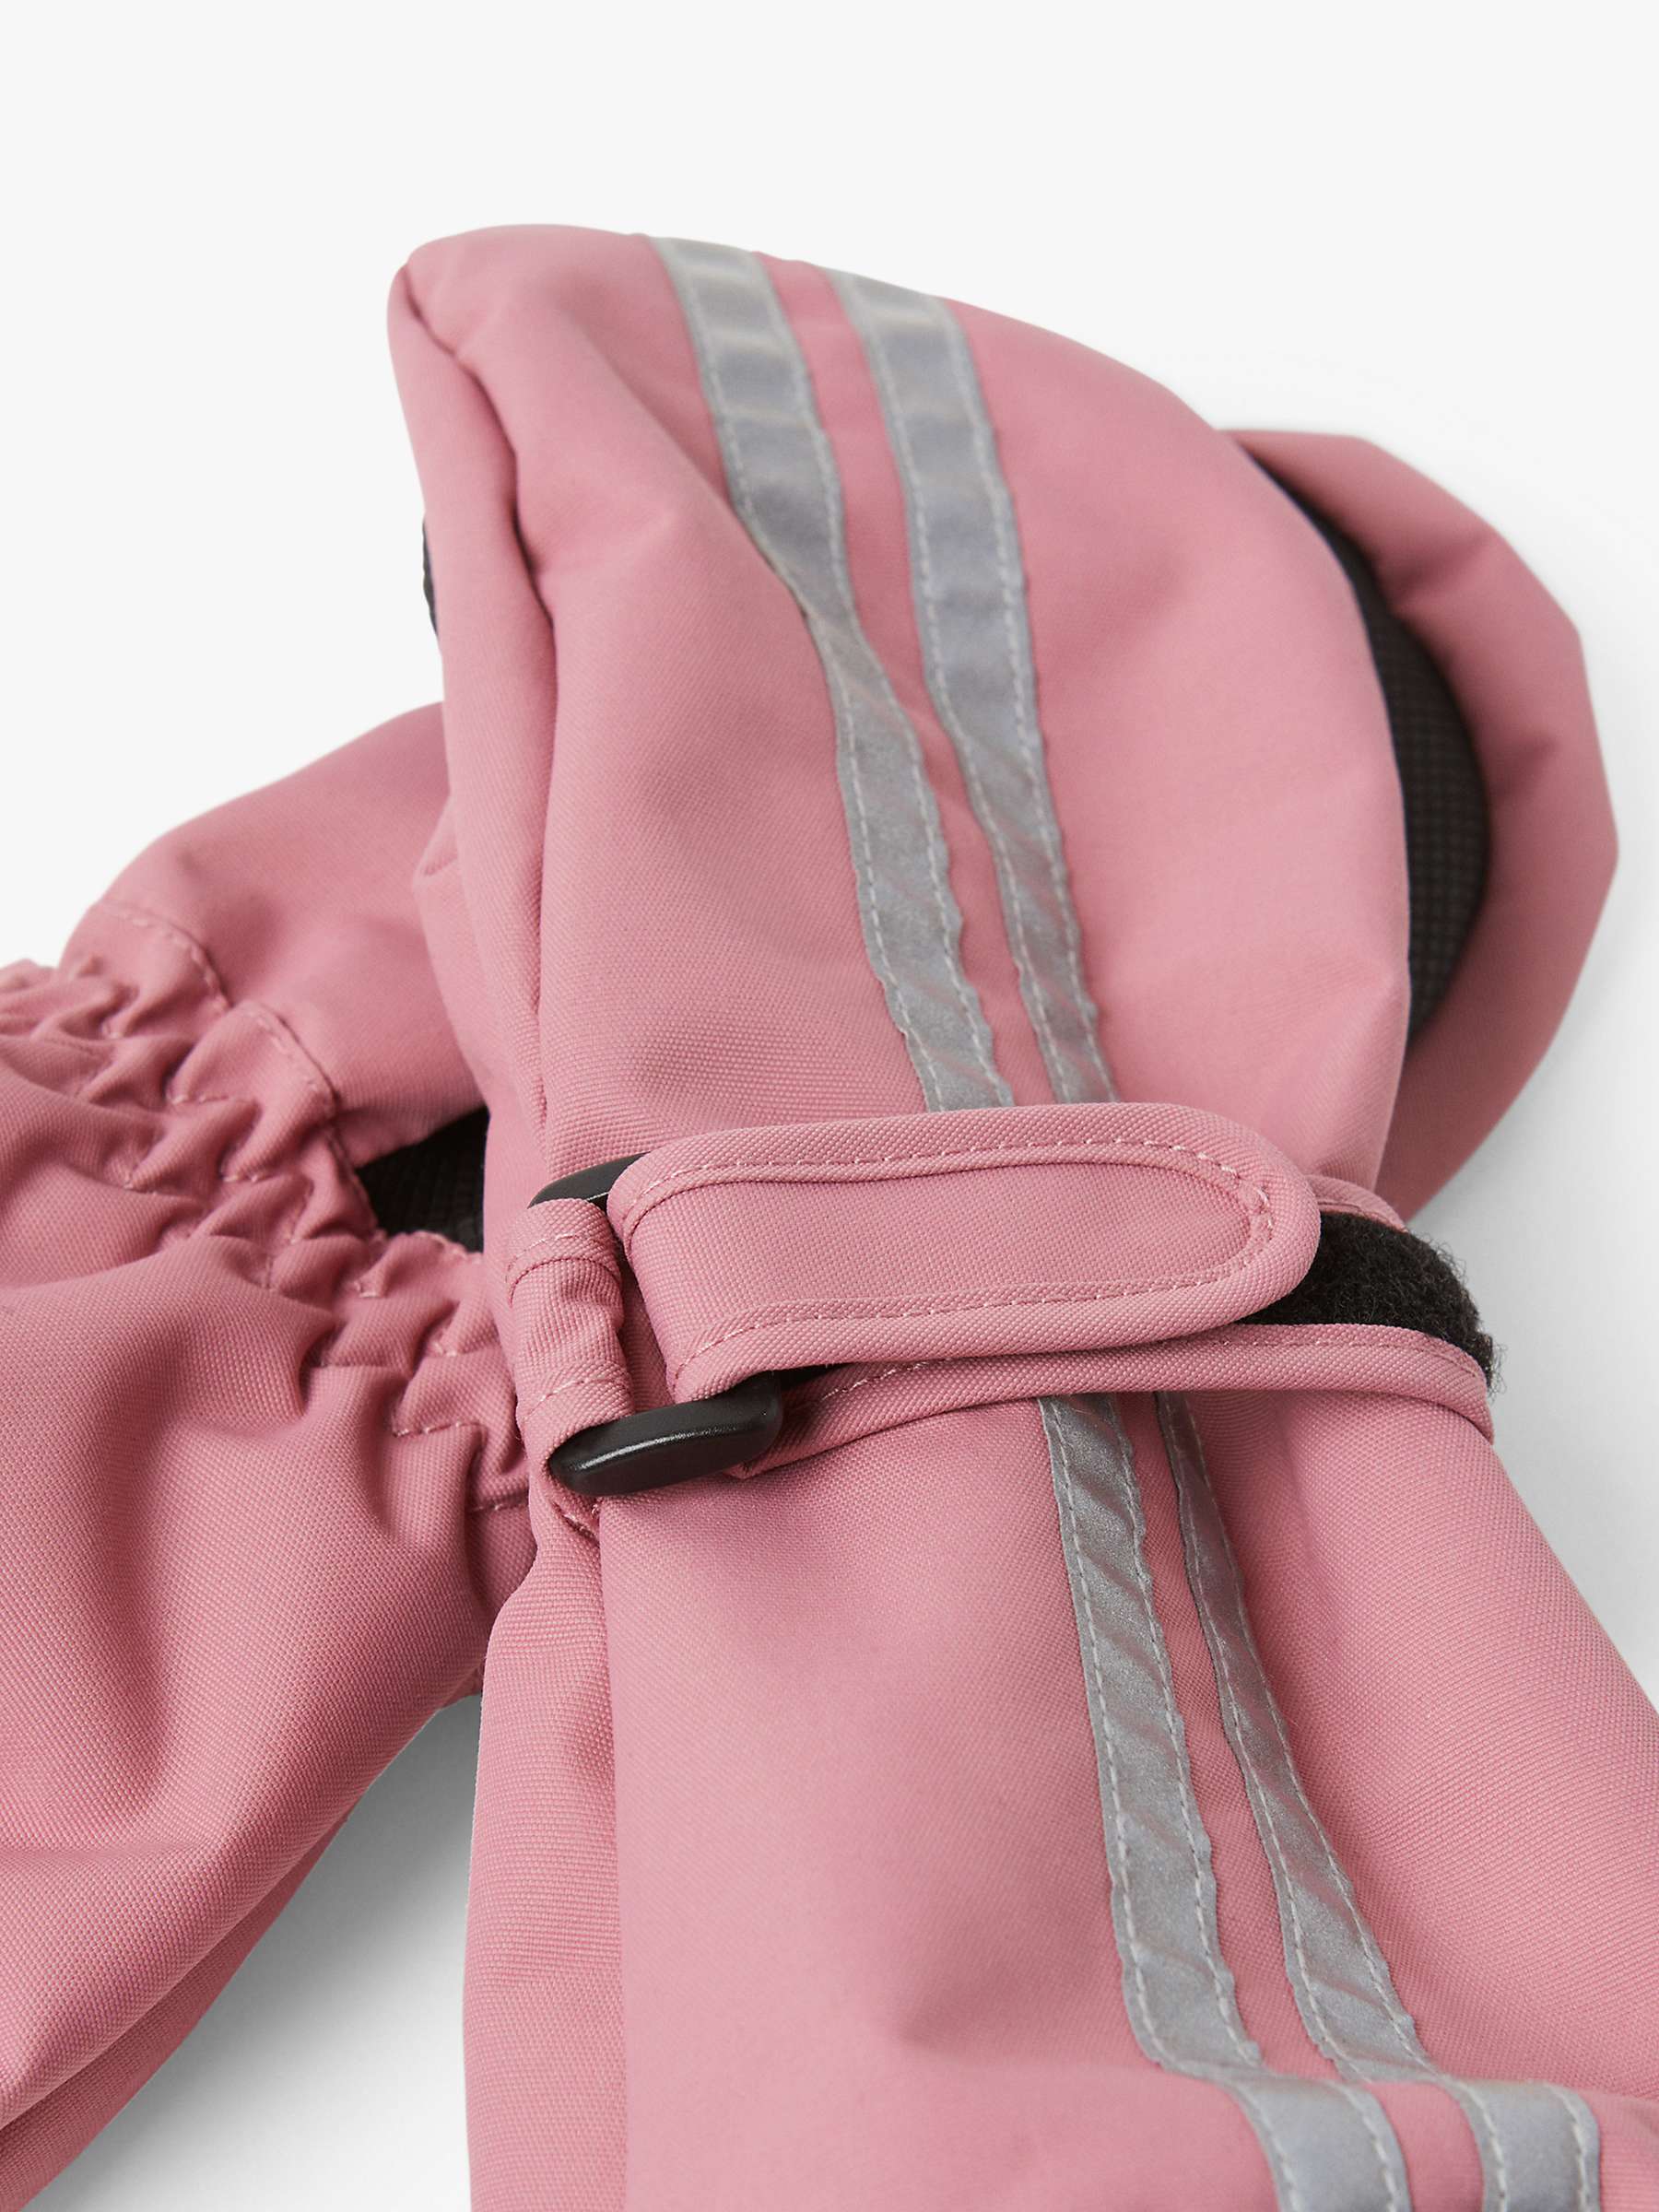 Buy Polarn O. Pyret Baby Windproof & Waterproof Shell Mittens, Pink Online at johnlewis.com